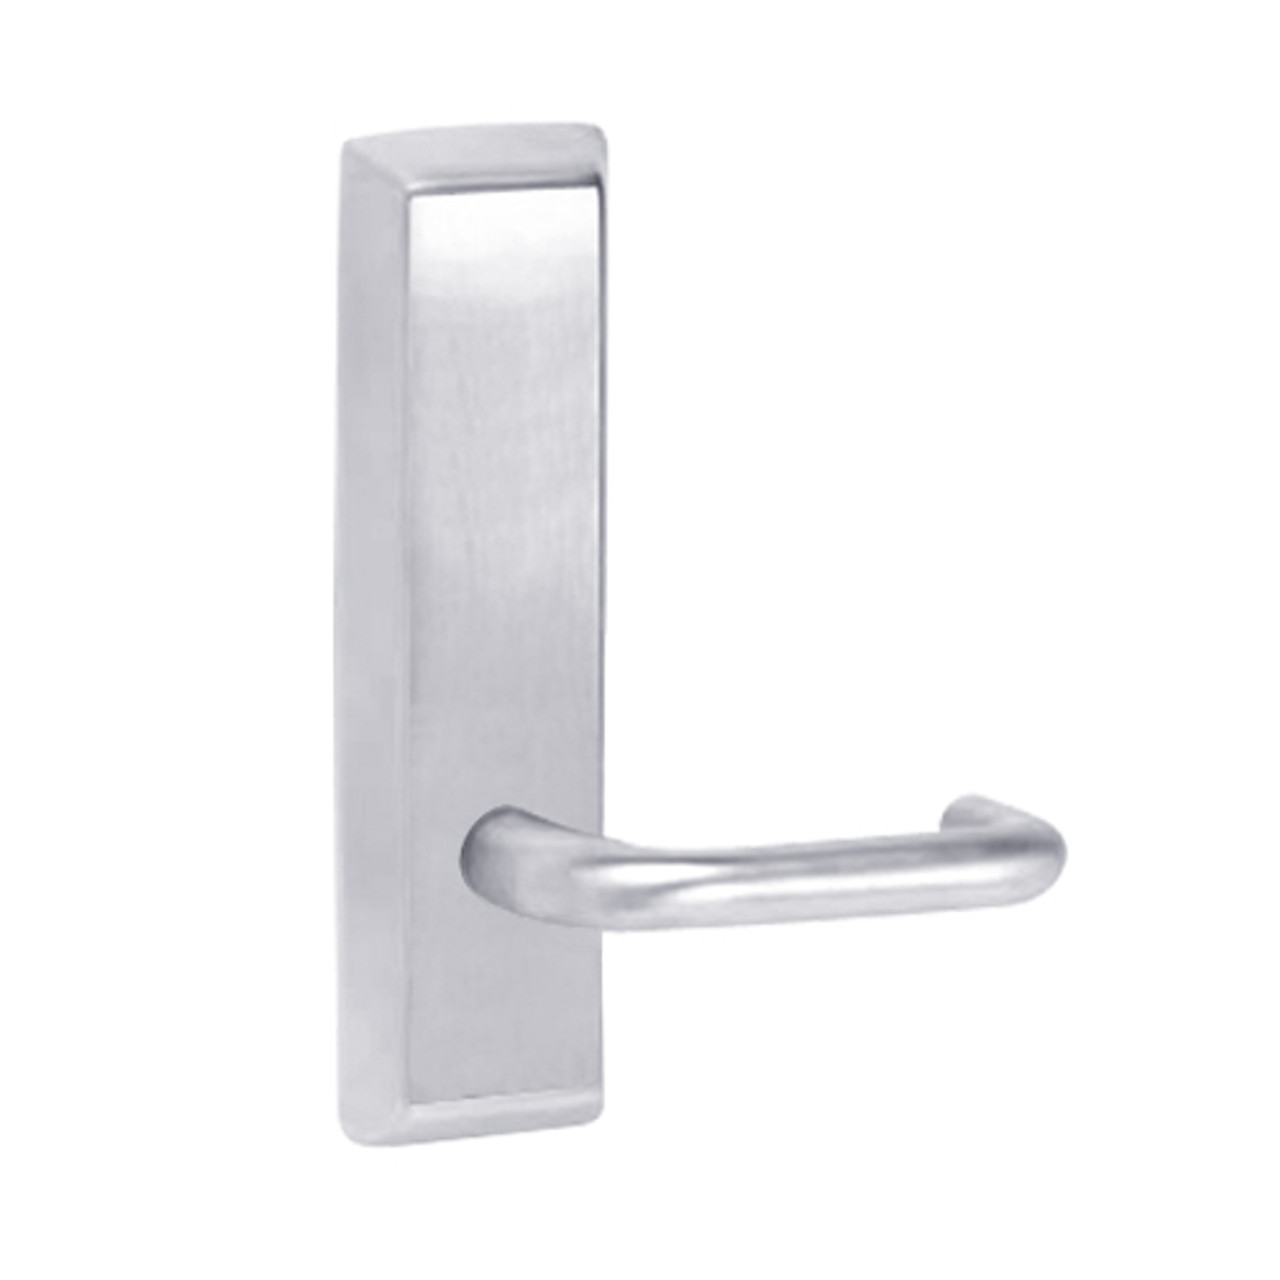 L950-625-RHR Corbin ED5000 Series Exit Device Trim with Dummy Lustra Lever in Bright Chrome Finish